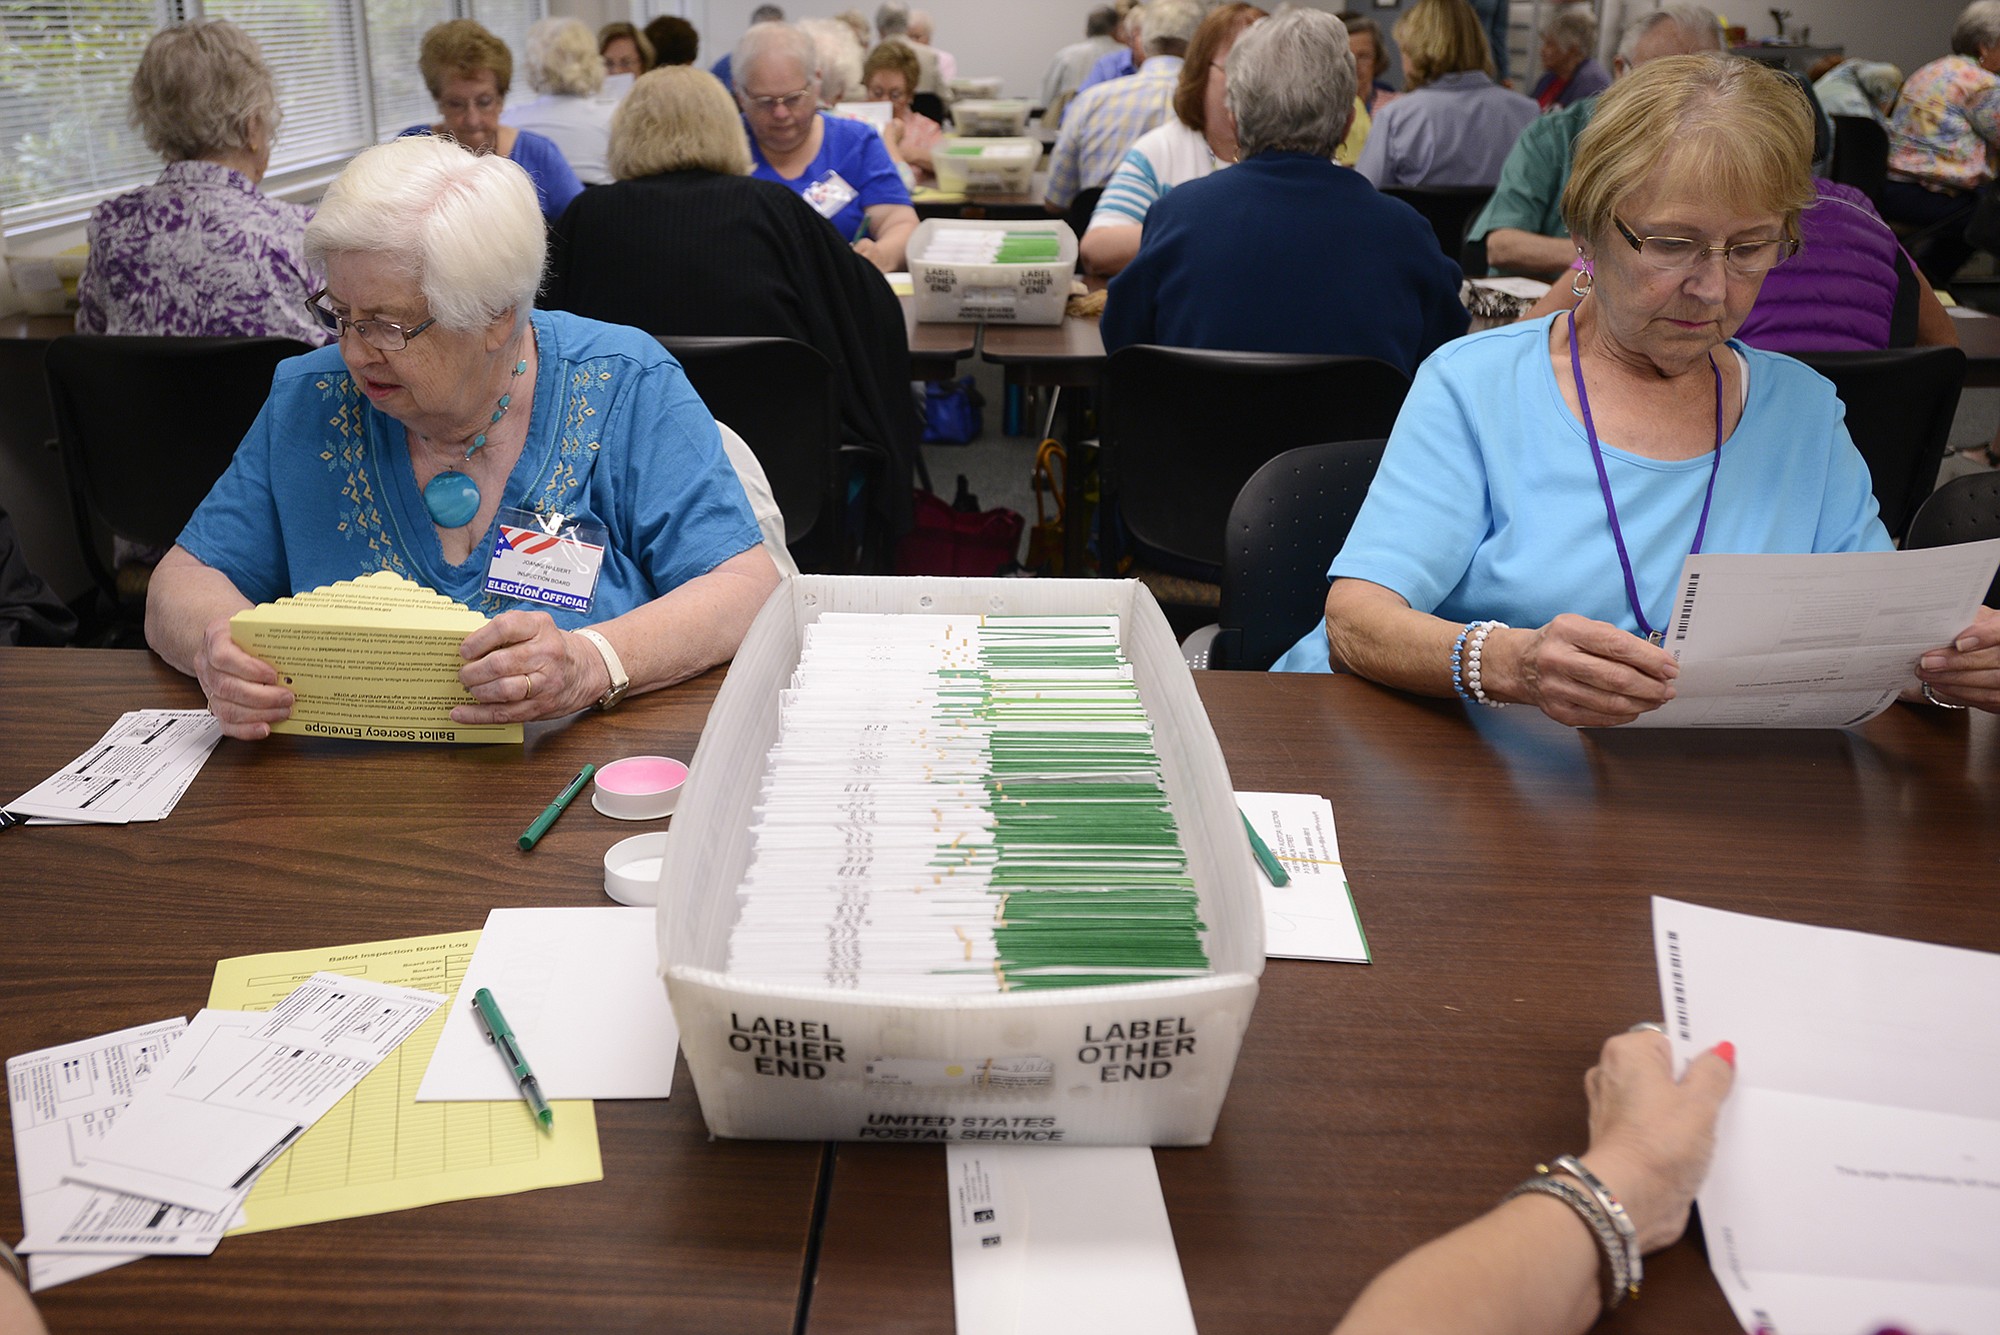 Joanne Halbert, left, and Margie Brown inspect and sort primary election ballots at the Clark County elections office on Wednesday.